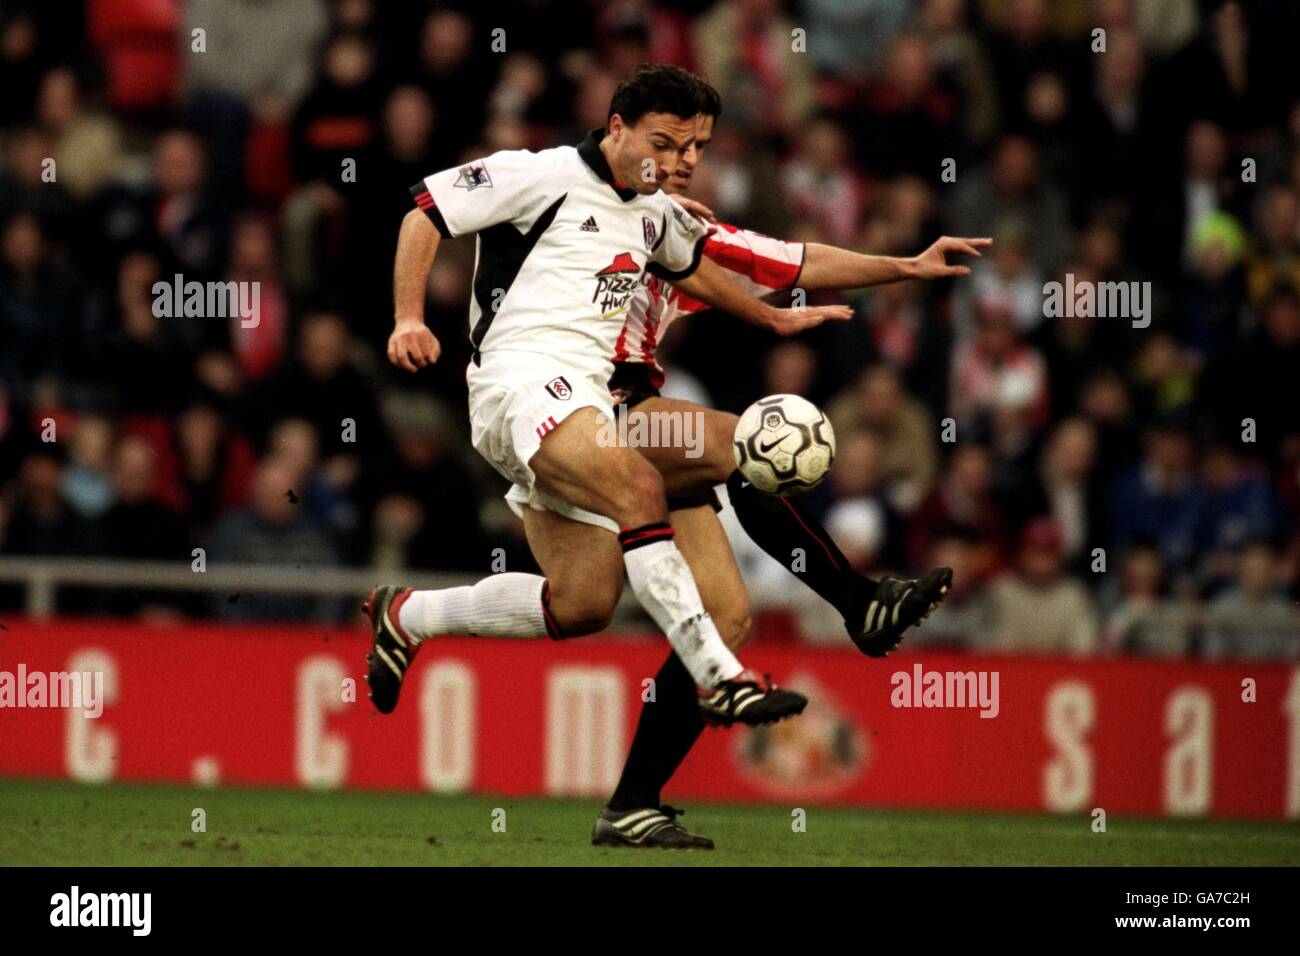 Fulham's Steed Malbranque runs past Sunderland's Bernt Haas on his way to scoring the opening goal Stock Photo